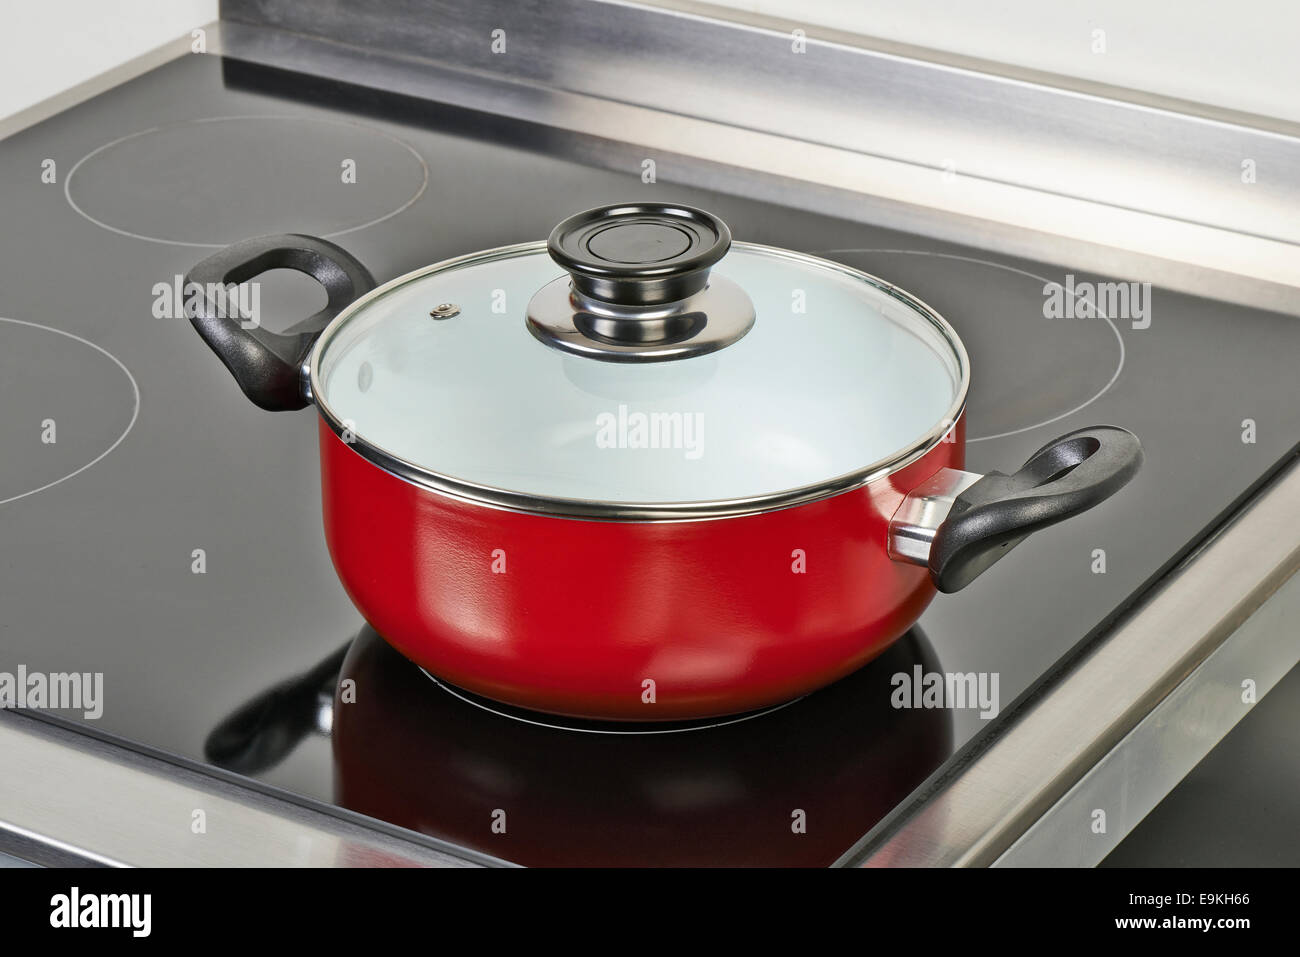 Red ceramic pan with cover on Electric hob in modern and domestic kitchen, view from above Stock Photo